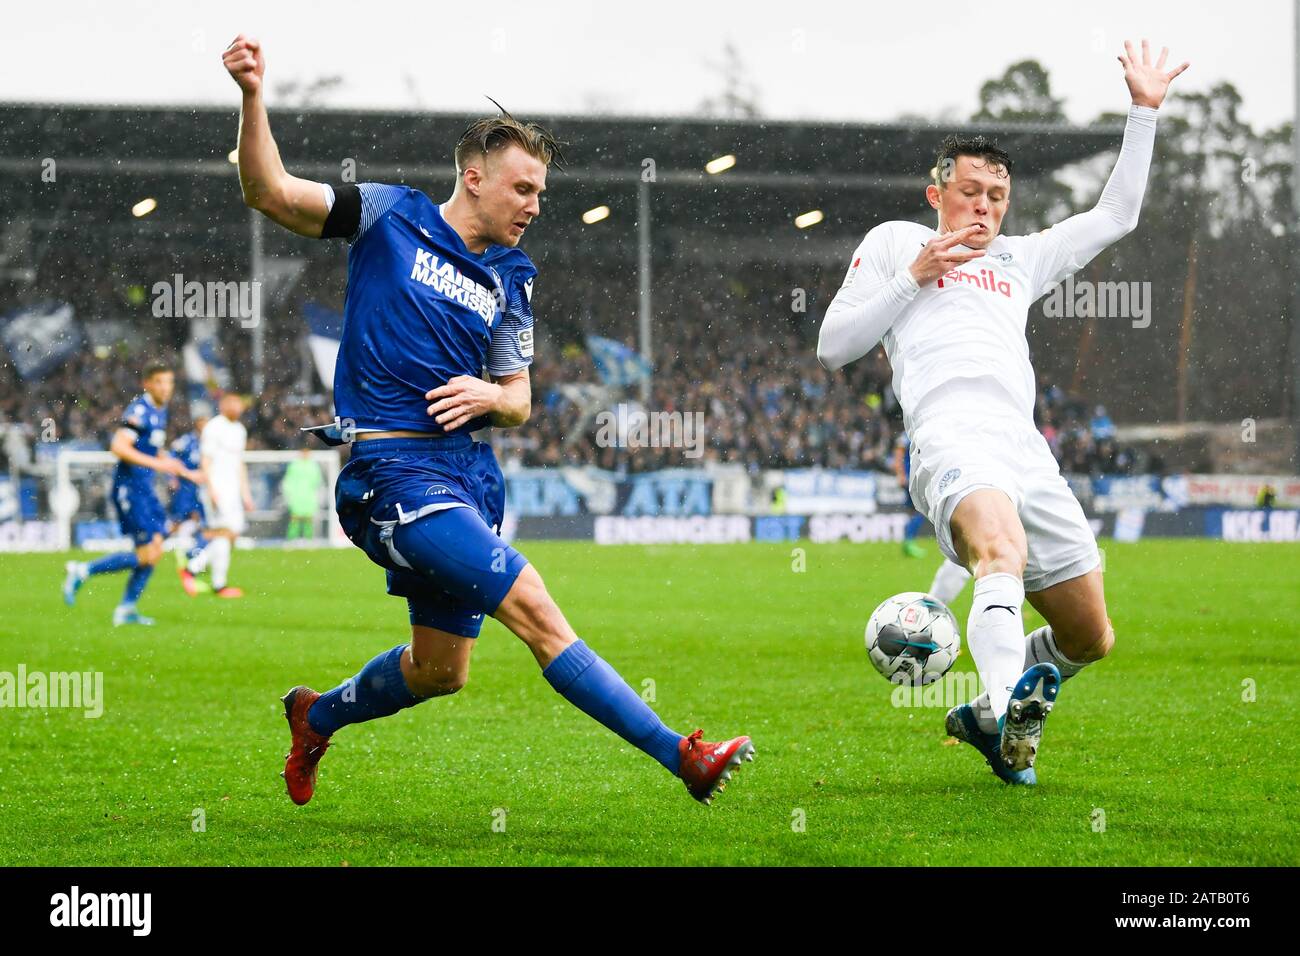 Karlsruhe, Germany. 01st Feb, 2020. Football: 2nd Bundesliga, 20th matchday, Karlsruher SC - Holstein Kiel, Wildparkstadion. Karlsruhe's Marco Thiede (l) in action against keels Fabian Reese (r) Credit: Tom Weller/dpa - IMPORTANT NOTE: In accordance with the regulations of the DFL Deutsche Fußball Liga and the DFB Deutscher Fußball-Bund, it is prohibited to exploit or have exploited in the stadium and/or from the game taken photographs in the form of sequence images and/or video-like photo series./dpa/Alamy Live News Stock Photo